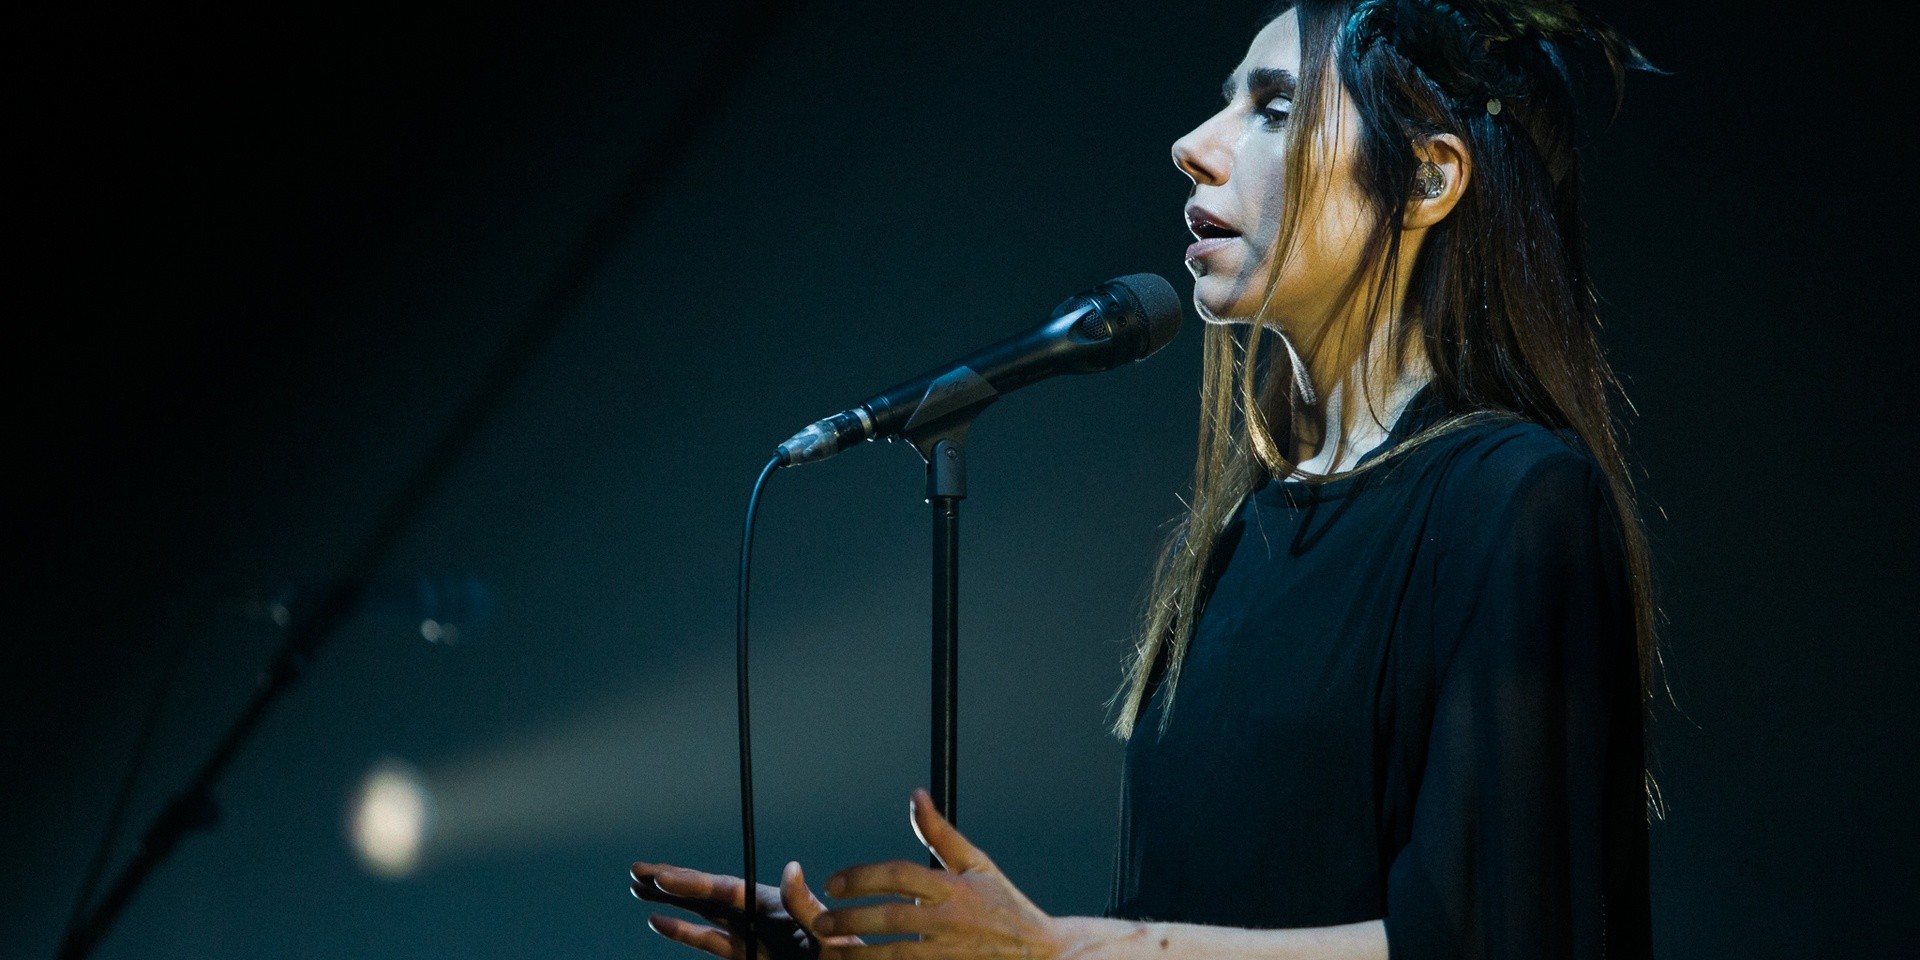 GIG REPORT: PJ Harvey wows fans in Singapore, despite playing almost all new material